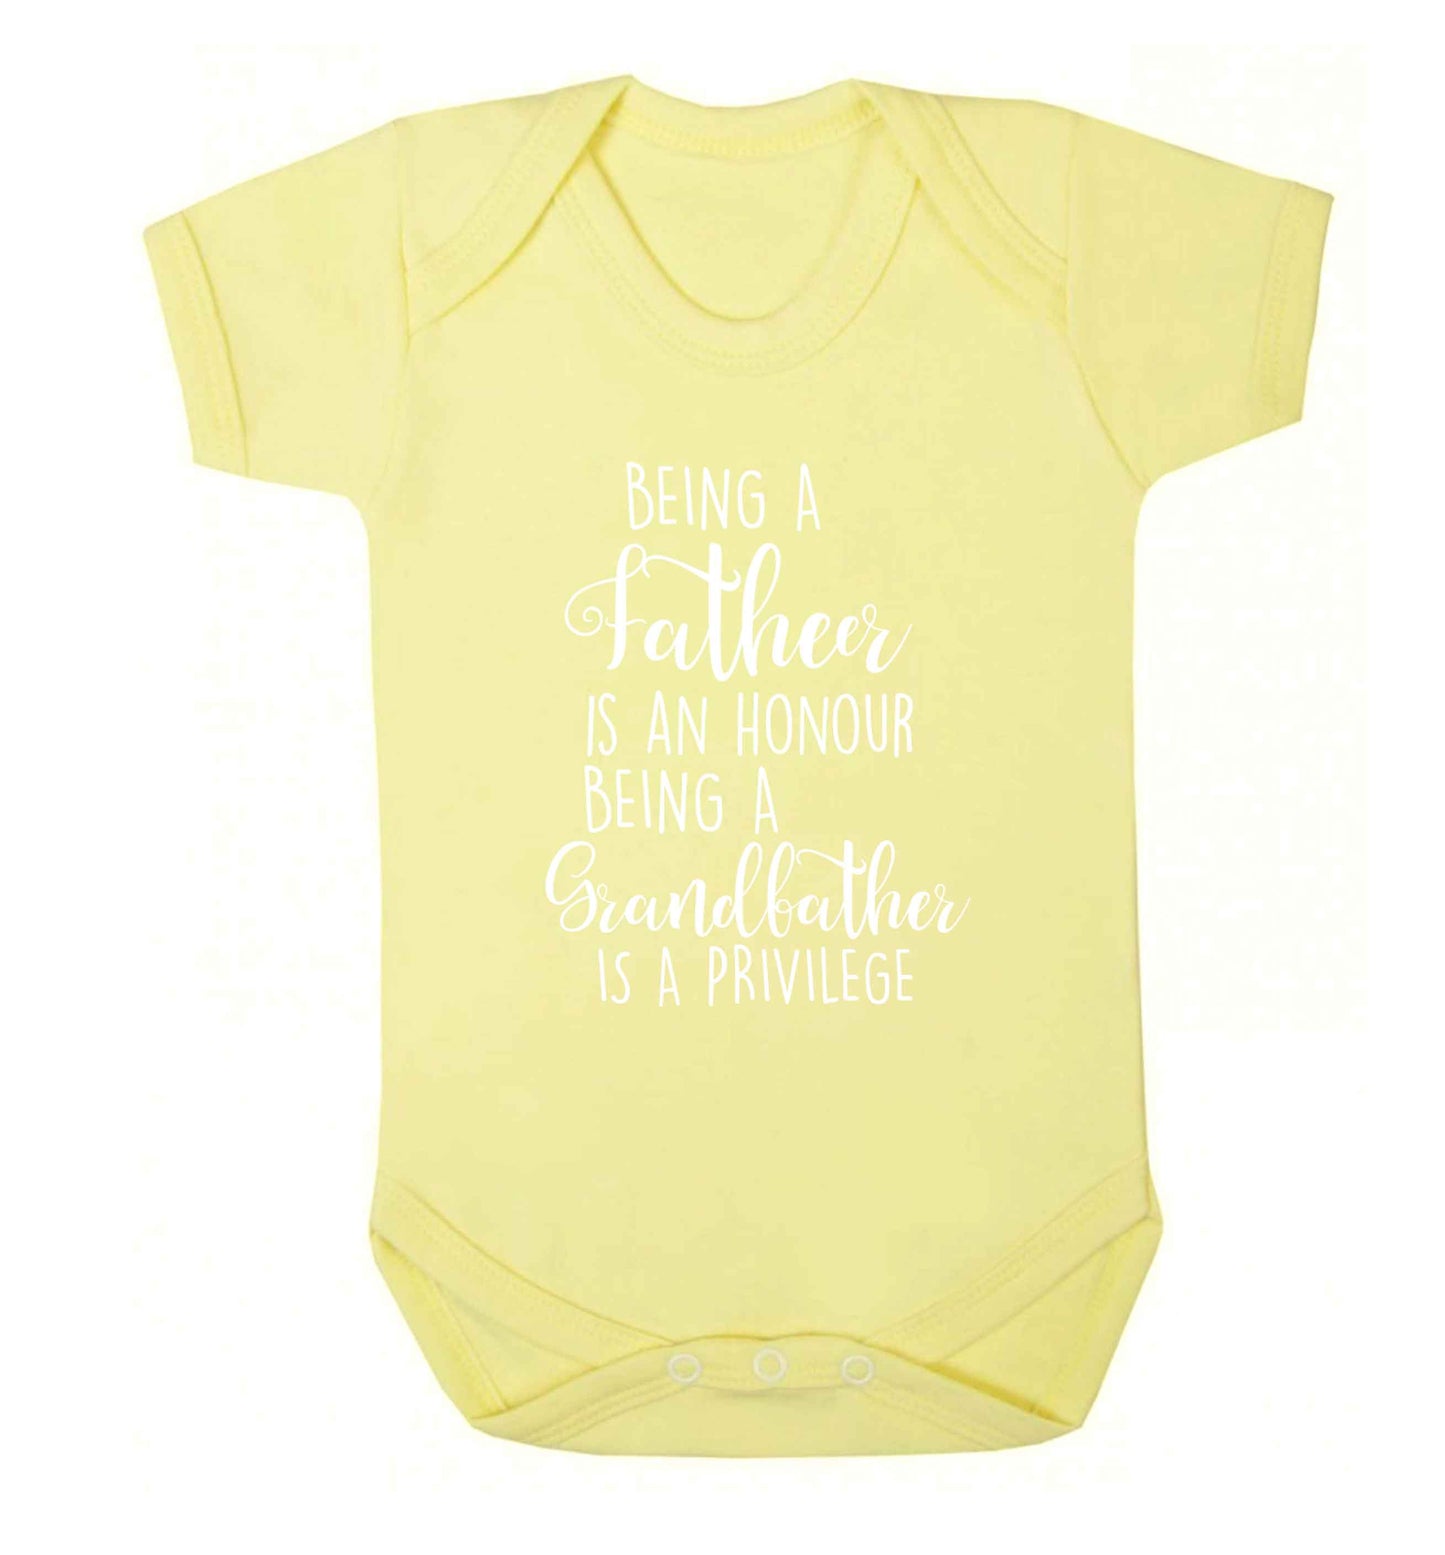 Being a father is an honour being a grandfather is a privilege Baby Vest pale yellow 18-24 months